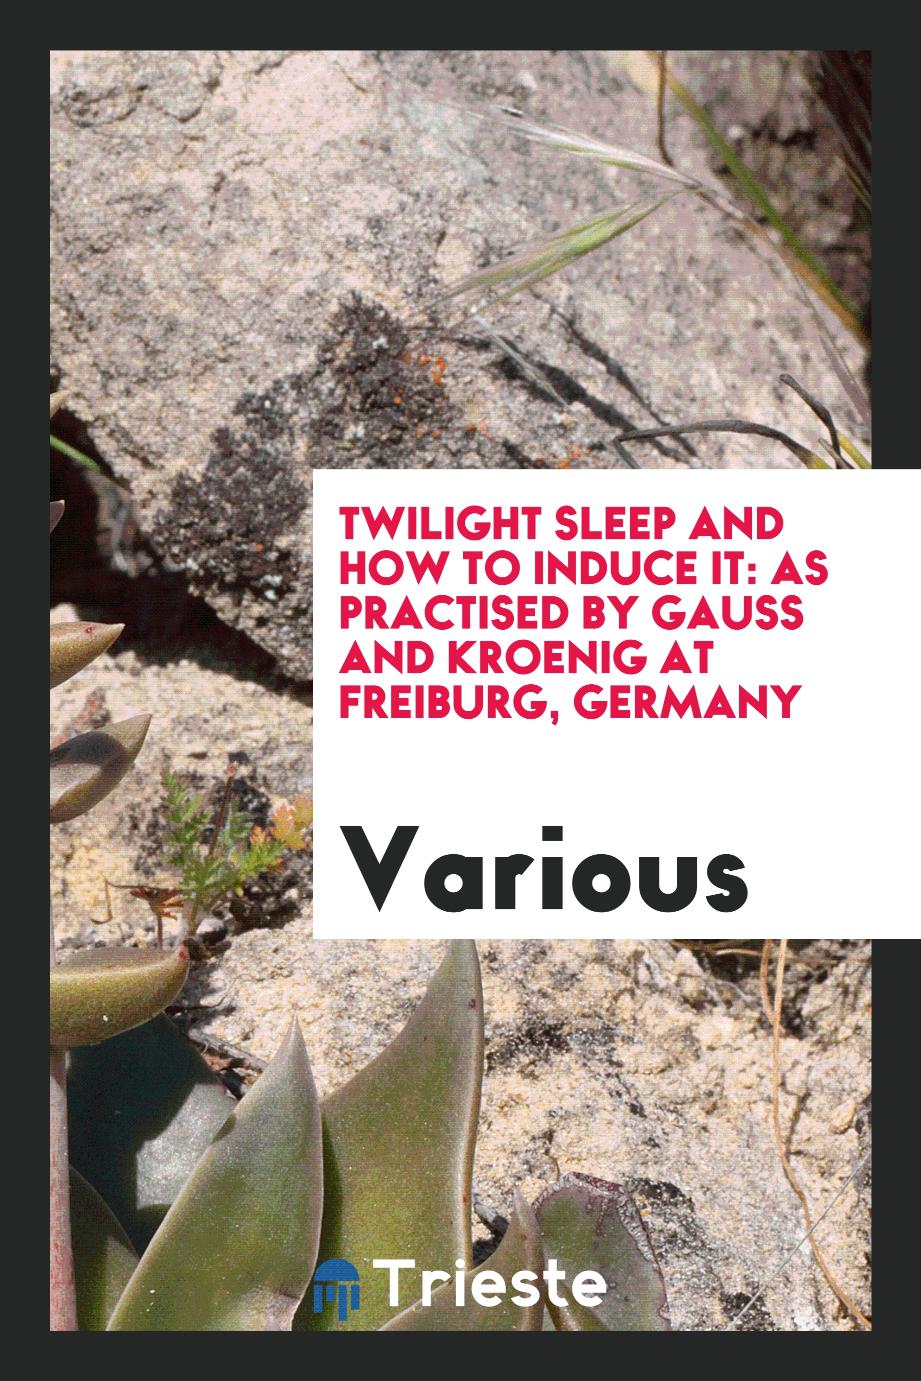 Twilight sleep and how to induce it: As Practised by Gauss and Kroenig at Freiburg, Germany